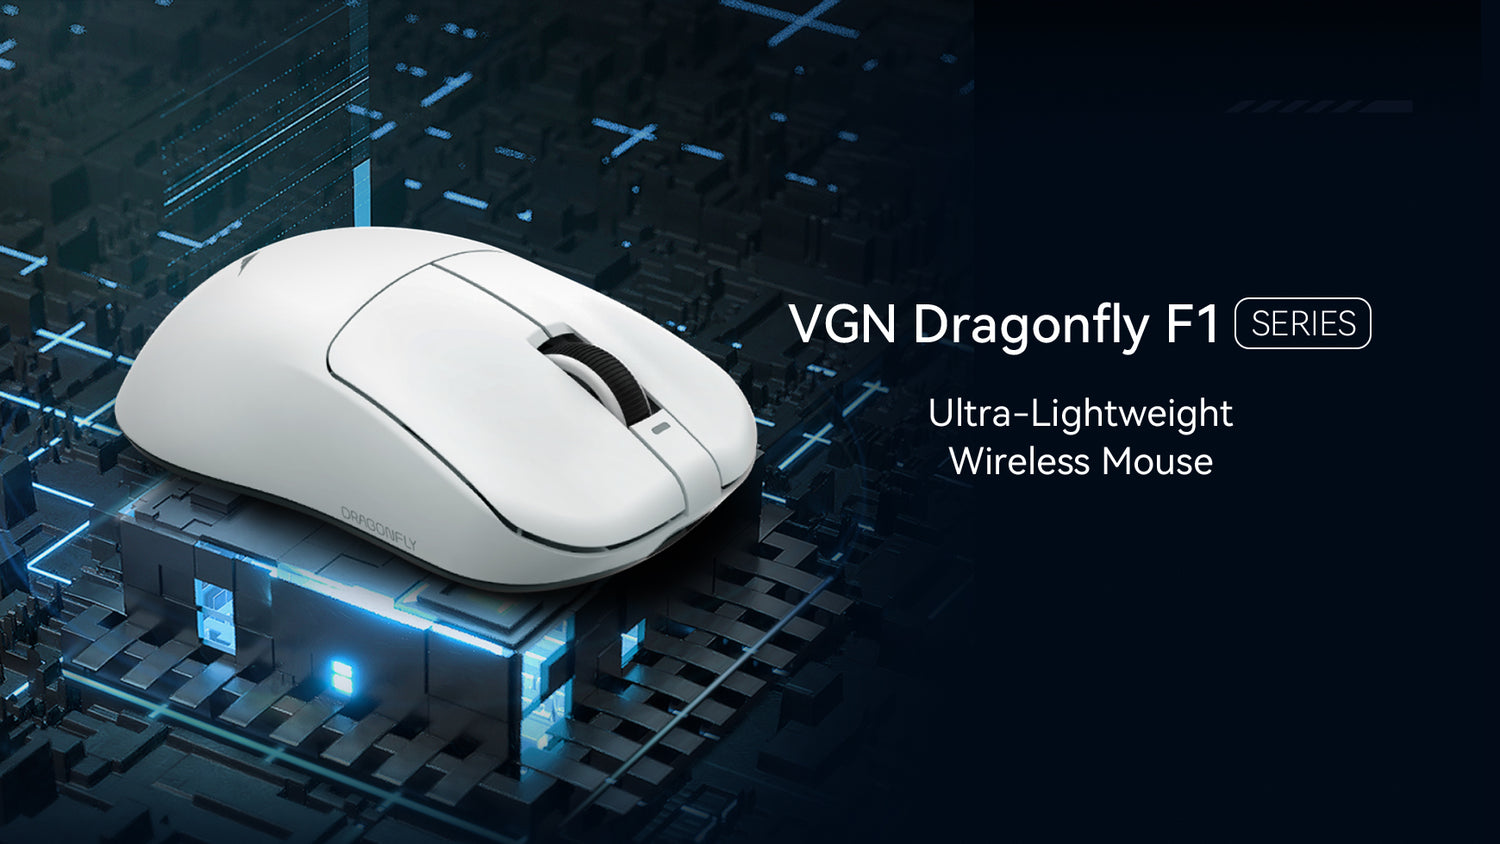 User Manual for VGN Dragonfly F1 Mouse